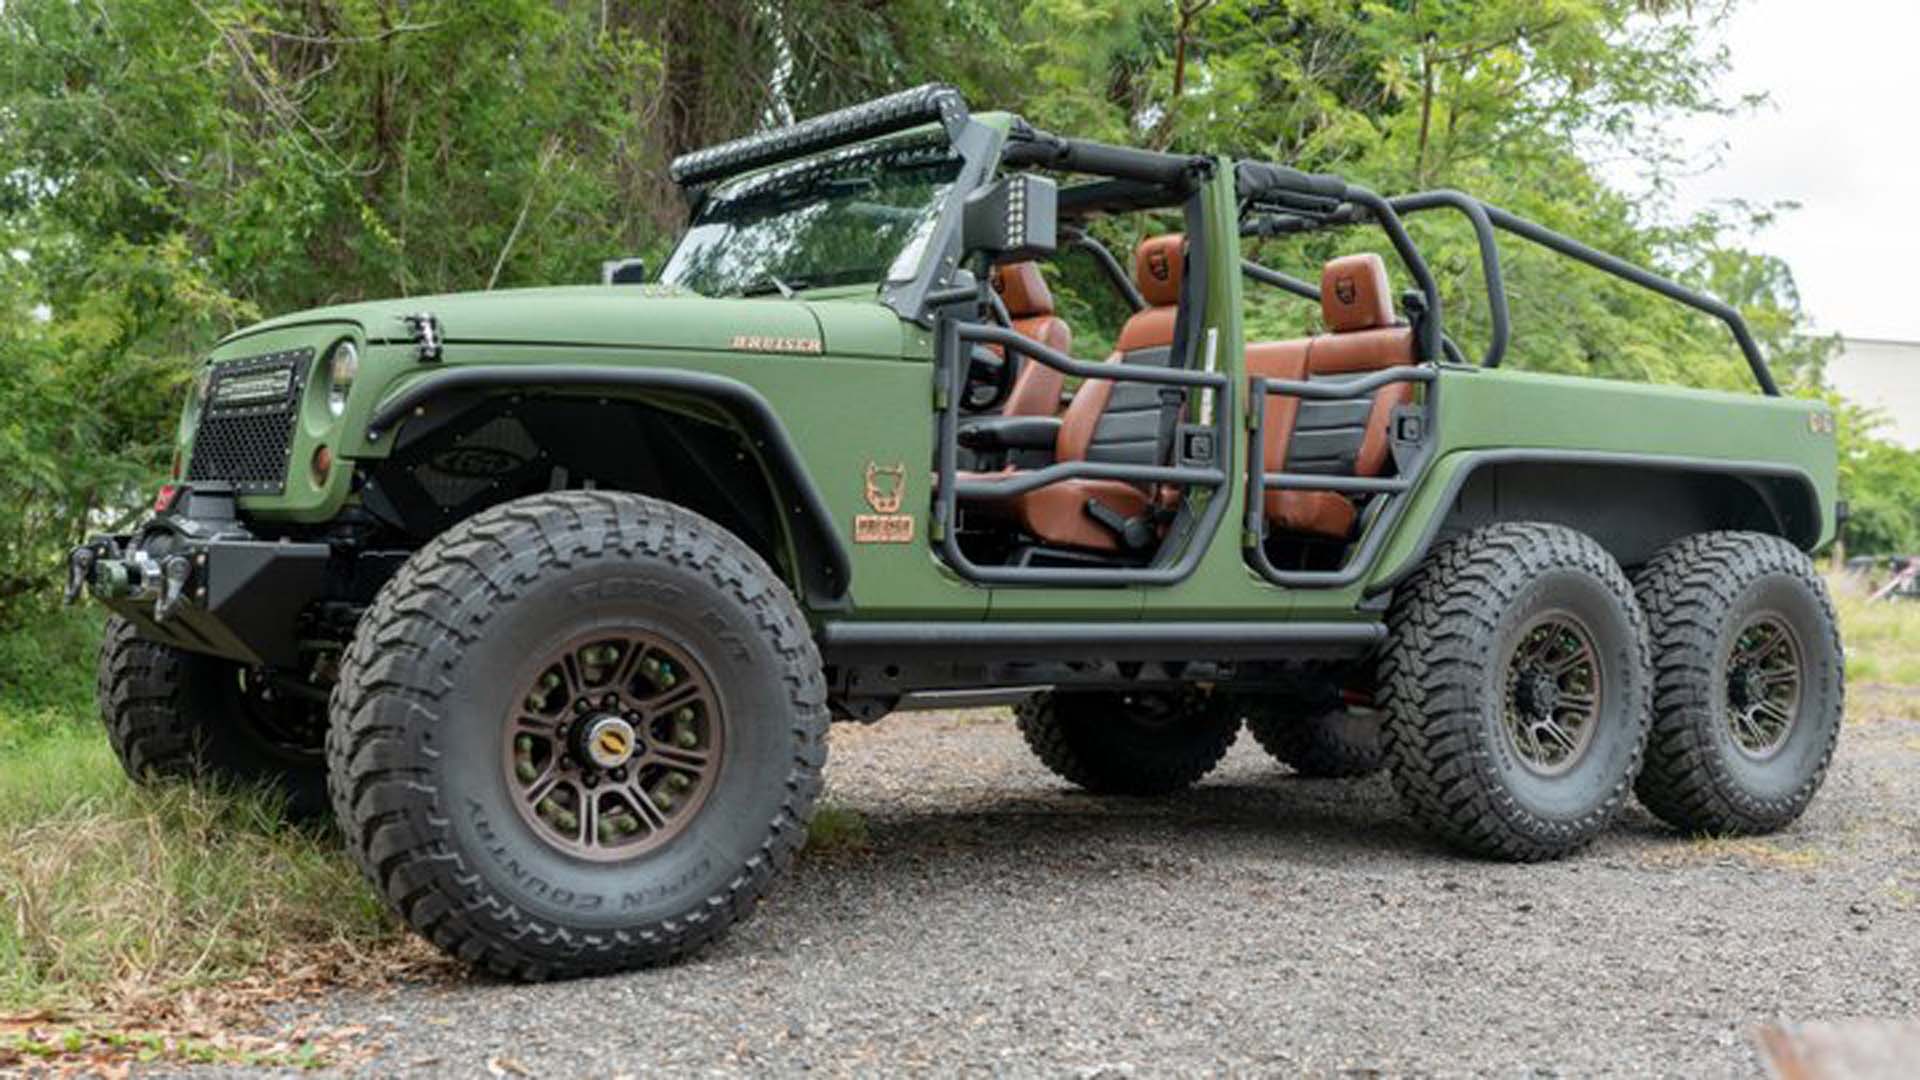 Which One Of These Custom Jeeps Would You Show Off?